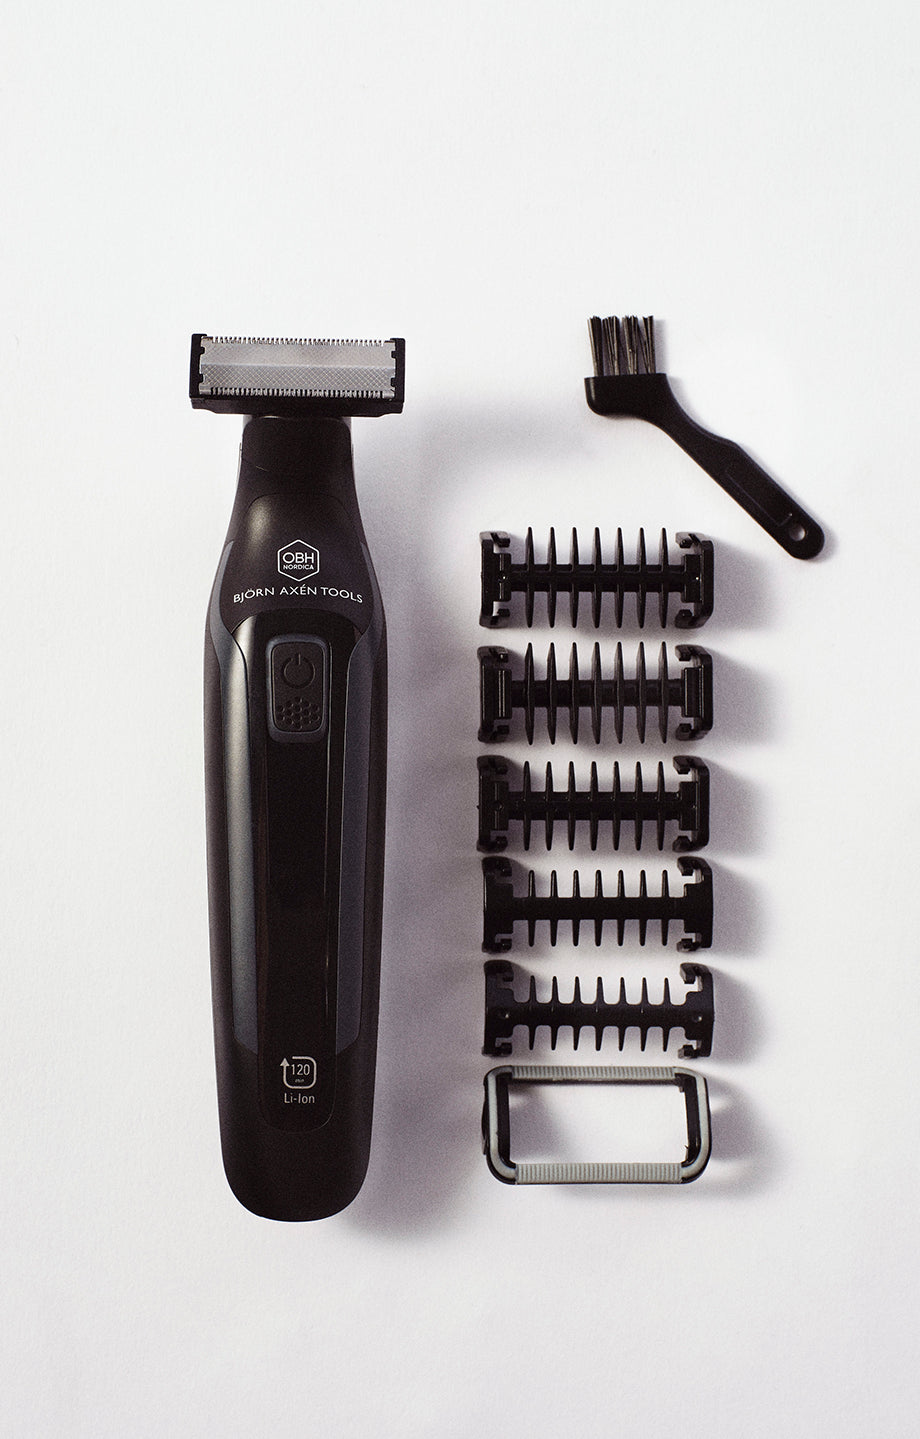 A professional trimmer for shaving and trimming both facial and body hair